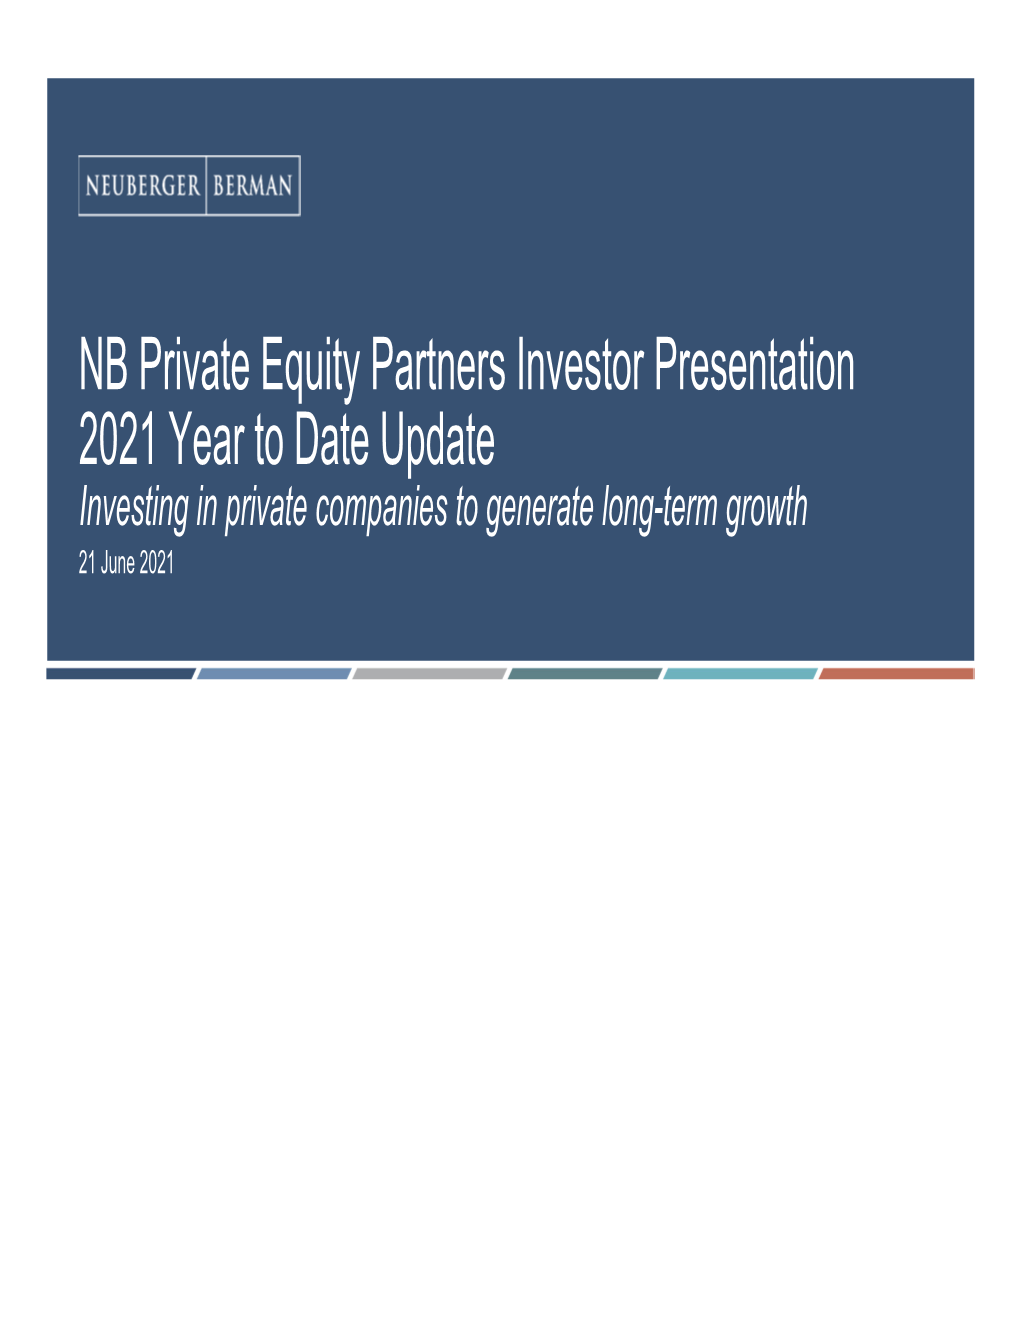 NB Private Equity Partners Investor Presentation 2021 Year to Date